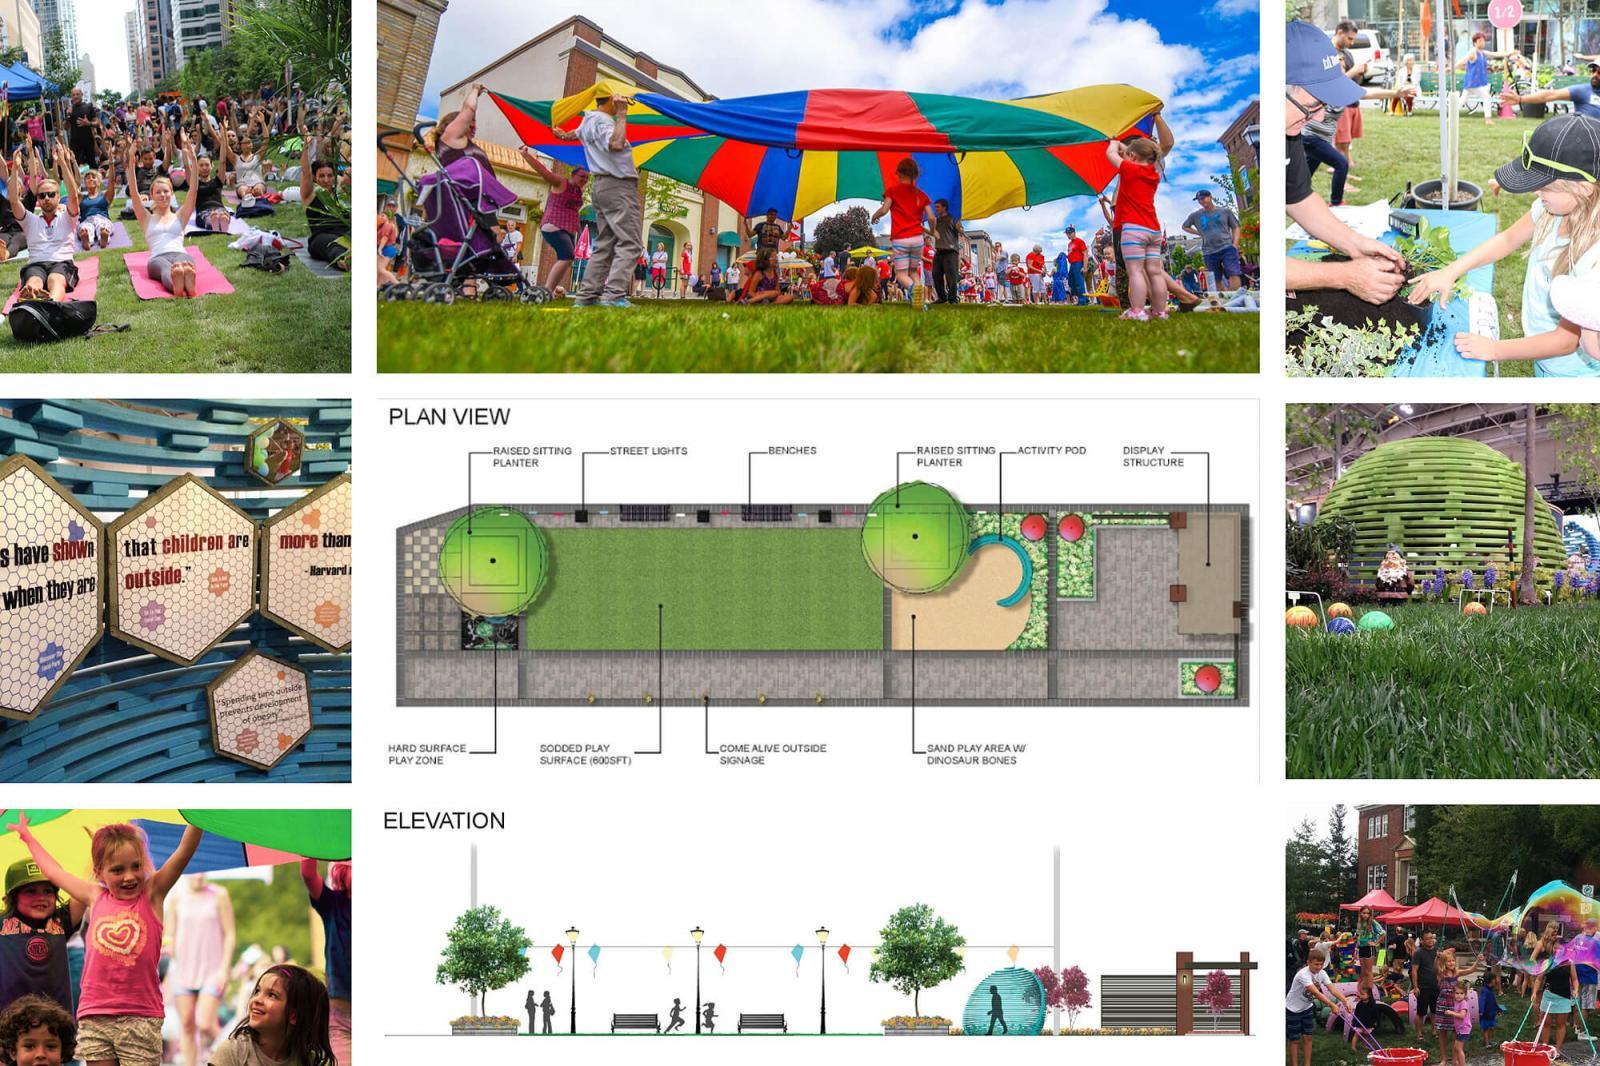 Green Streets Play Zone at Canada Blooms 2019